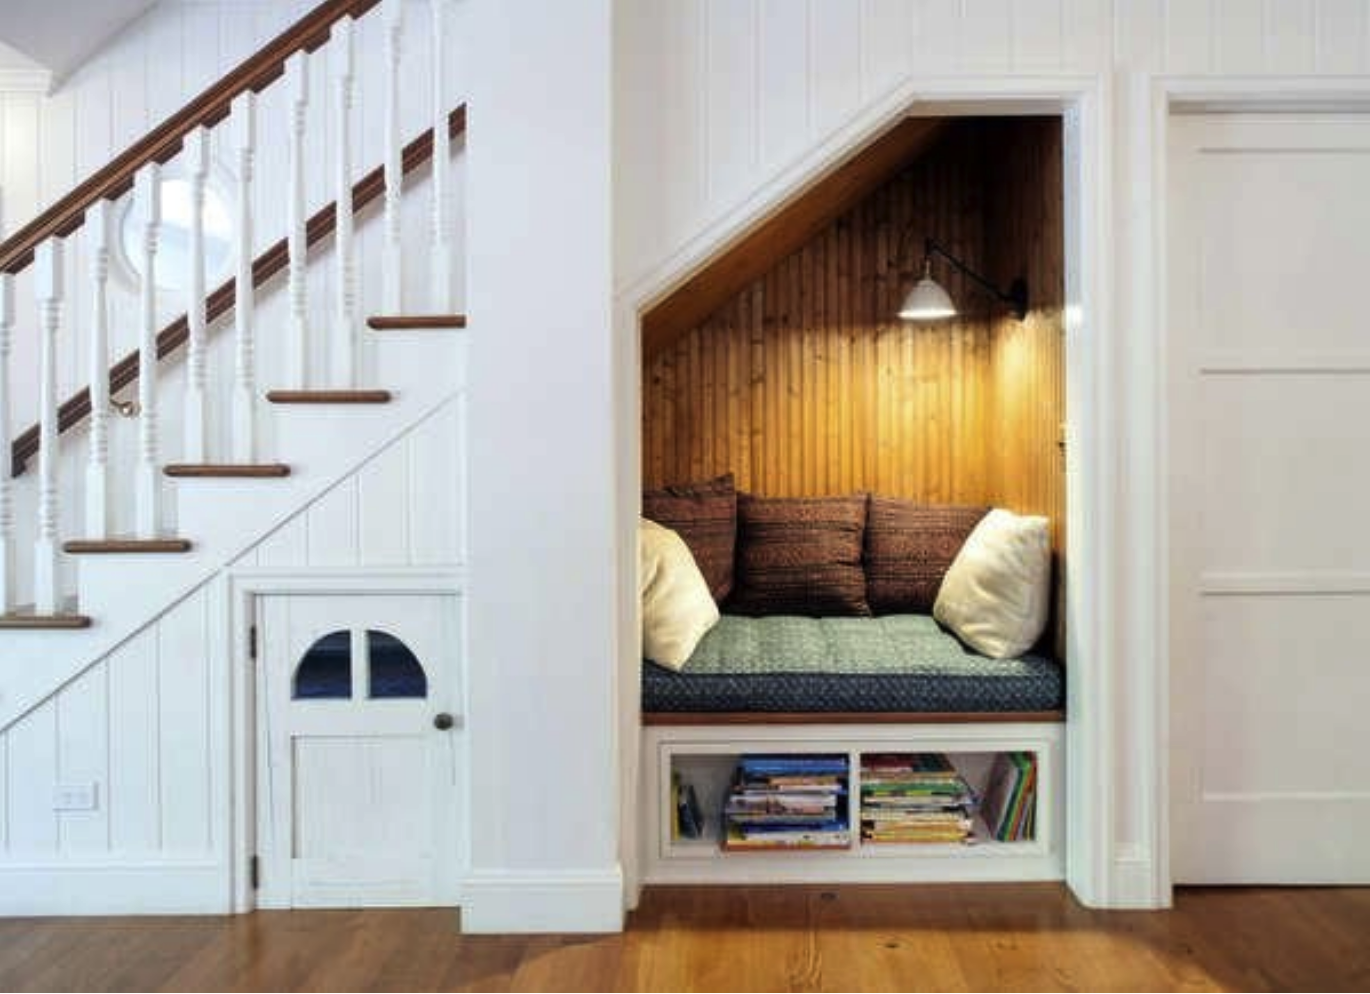 side view of a large white staircase with a nook underneath with cushions and wood paneling